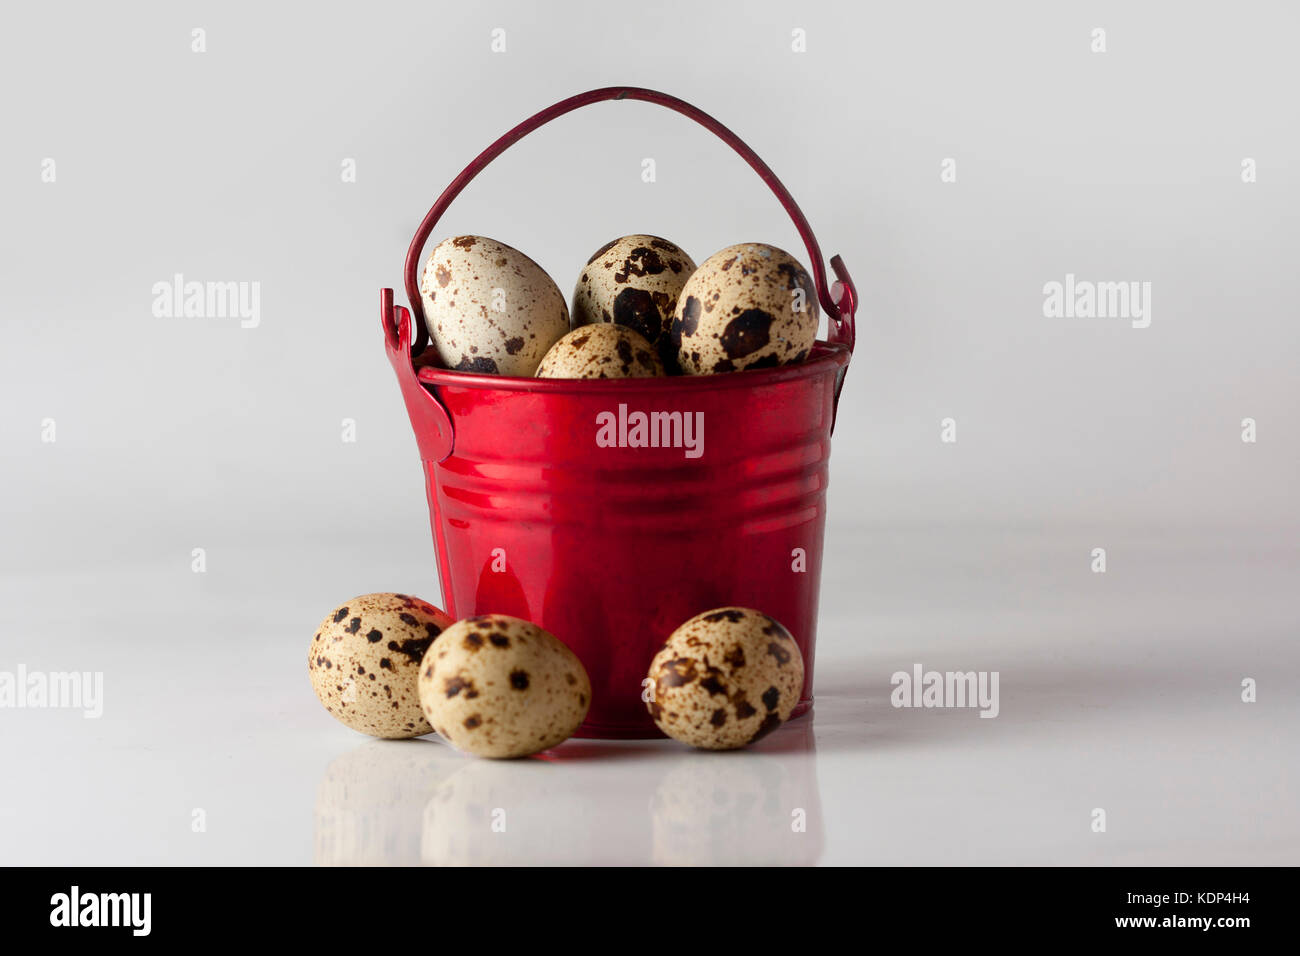 Small red pail with partridge eggs on the white background Stock Photo